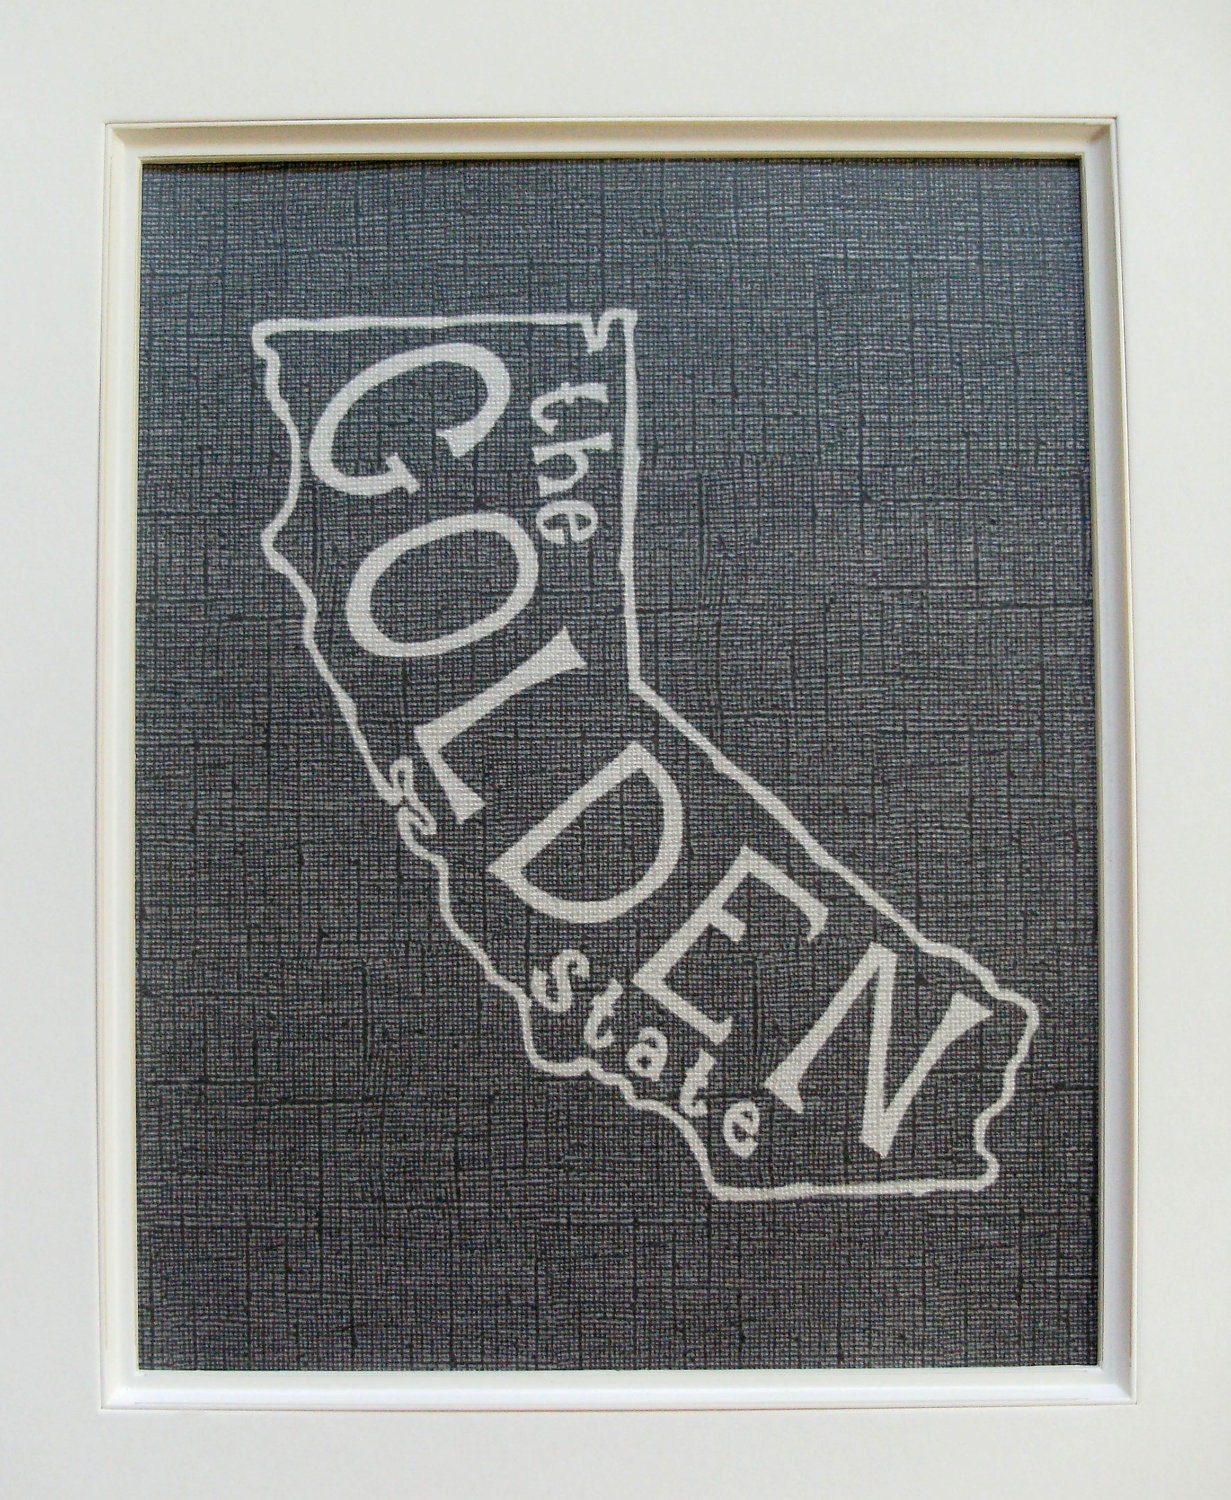 The Golden State (California) - Place I Love Print - White on Black - 8x10 Illustrated Print